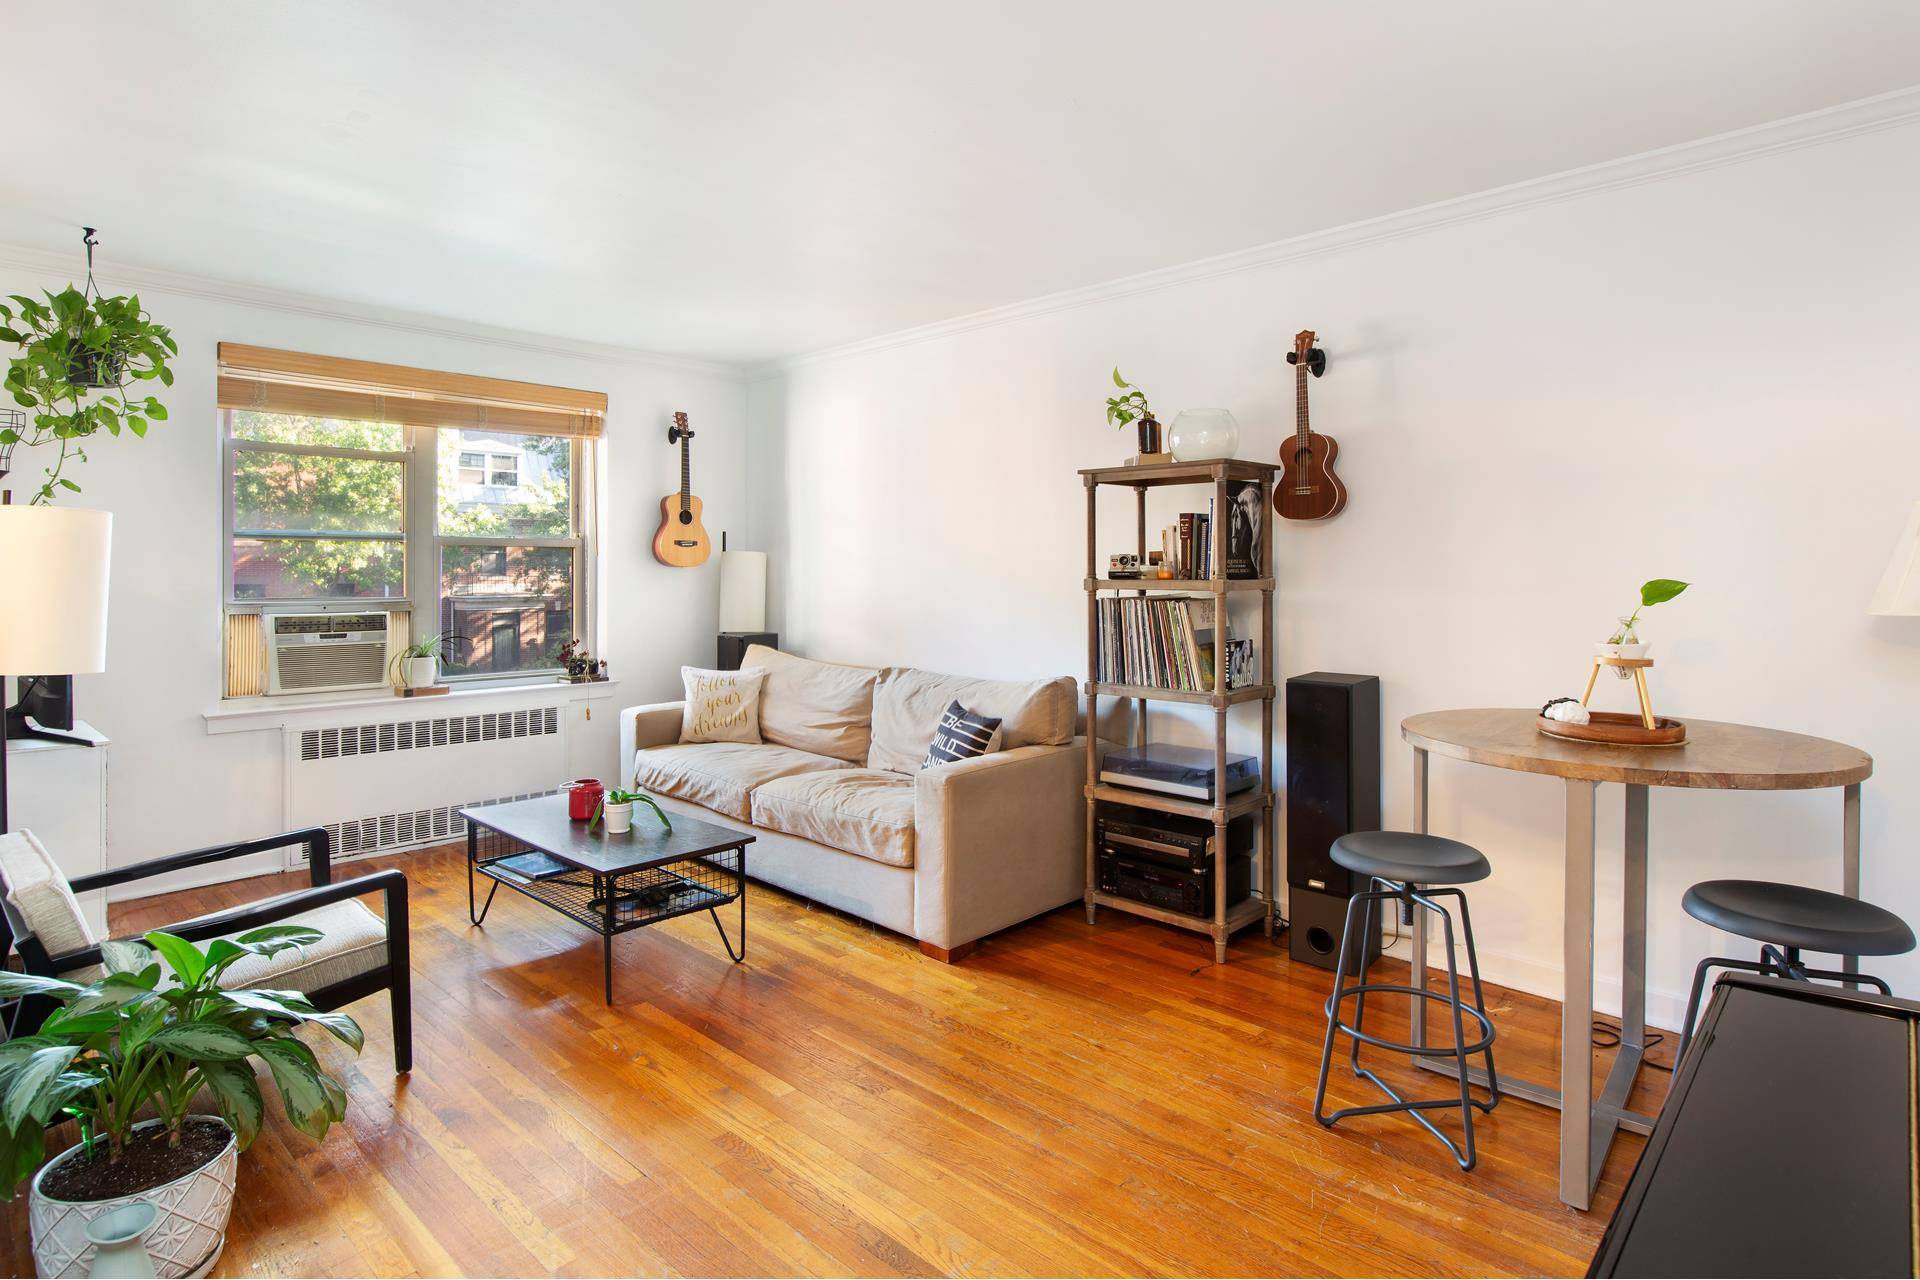 PRICE JUST REDUCED ! Located on one of the most beautiful leafy blocks in the highly sought after Cobble Hill neighborhood.